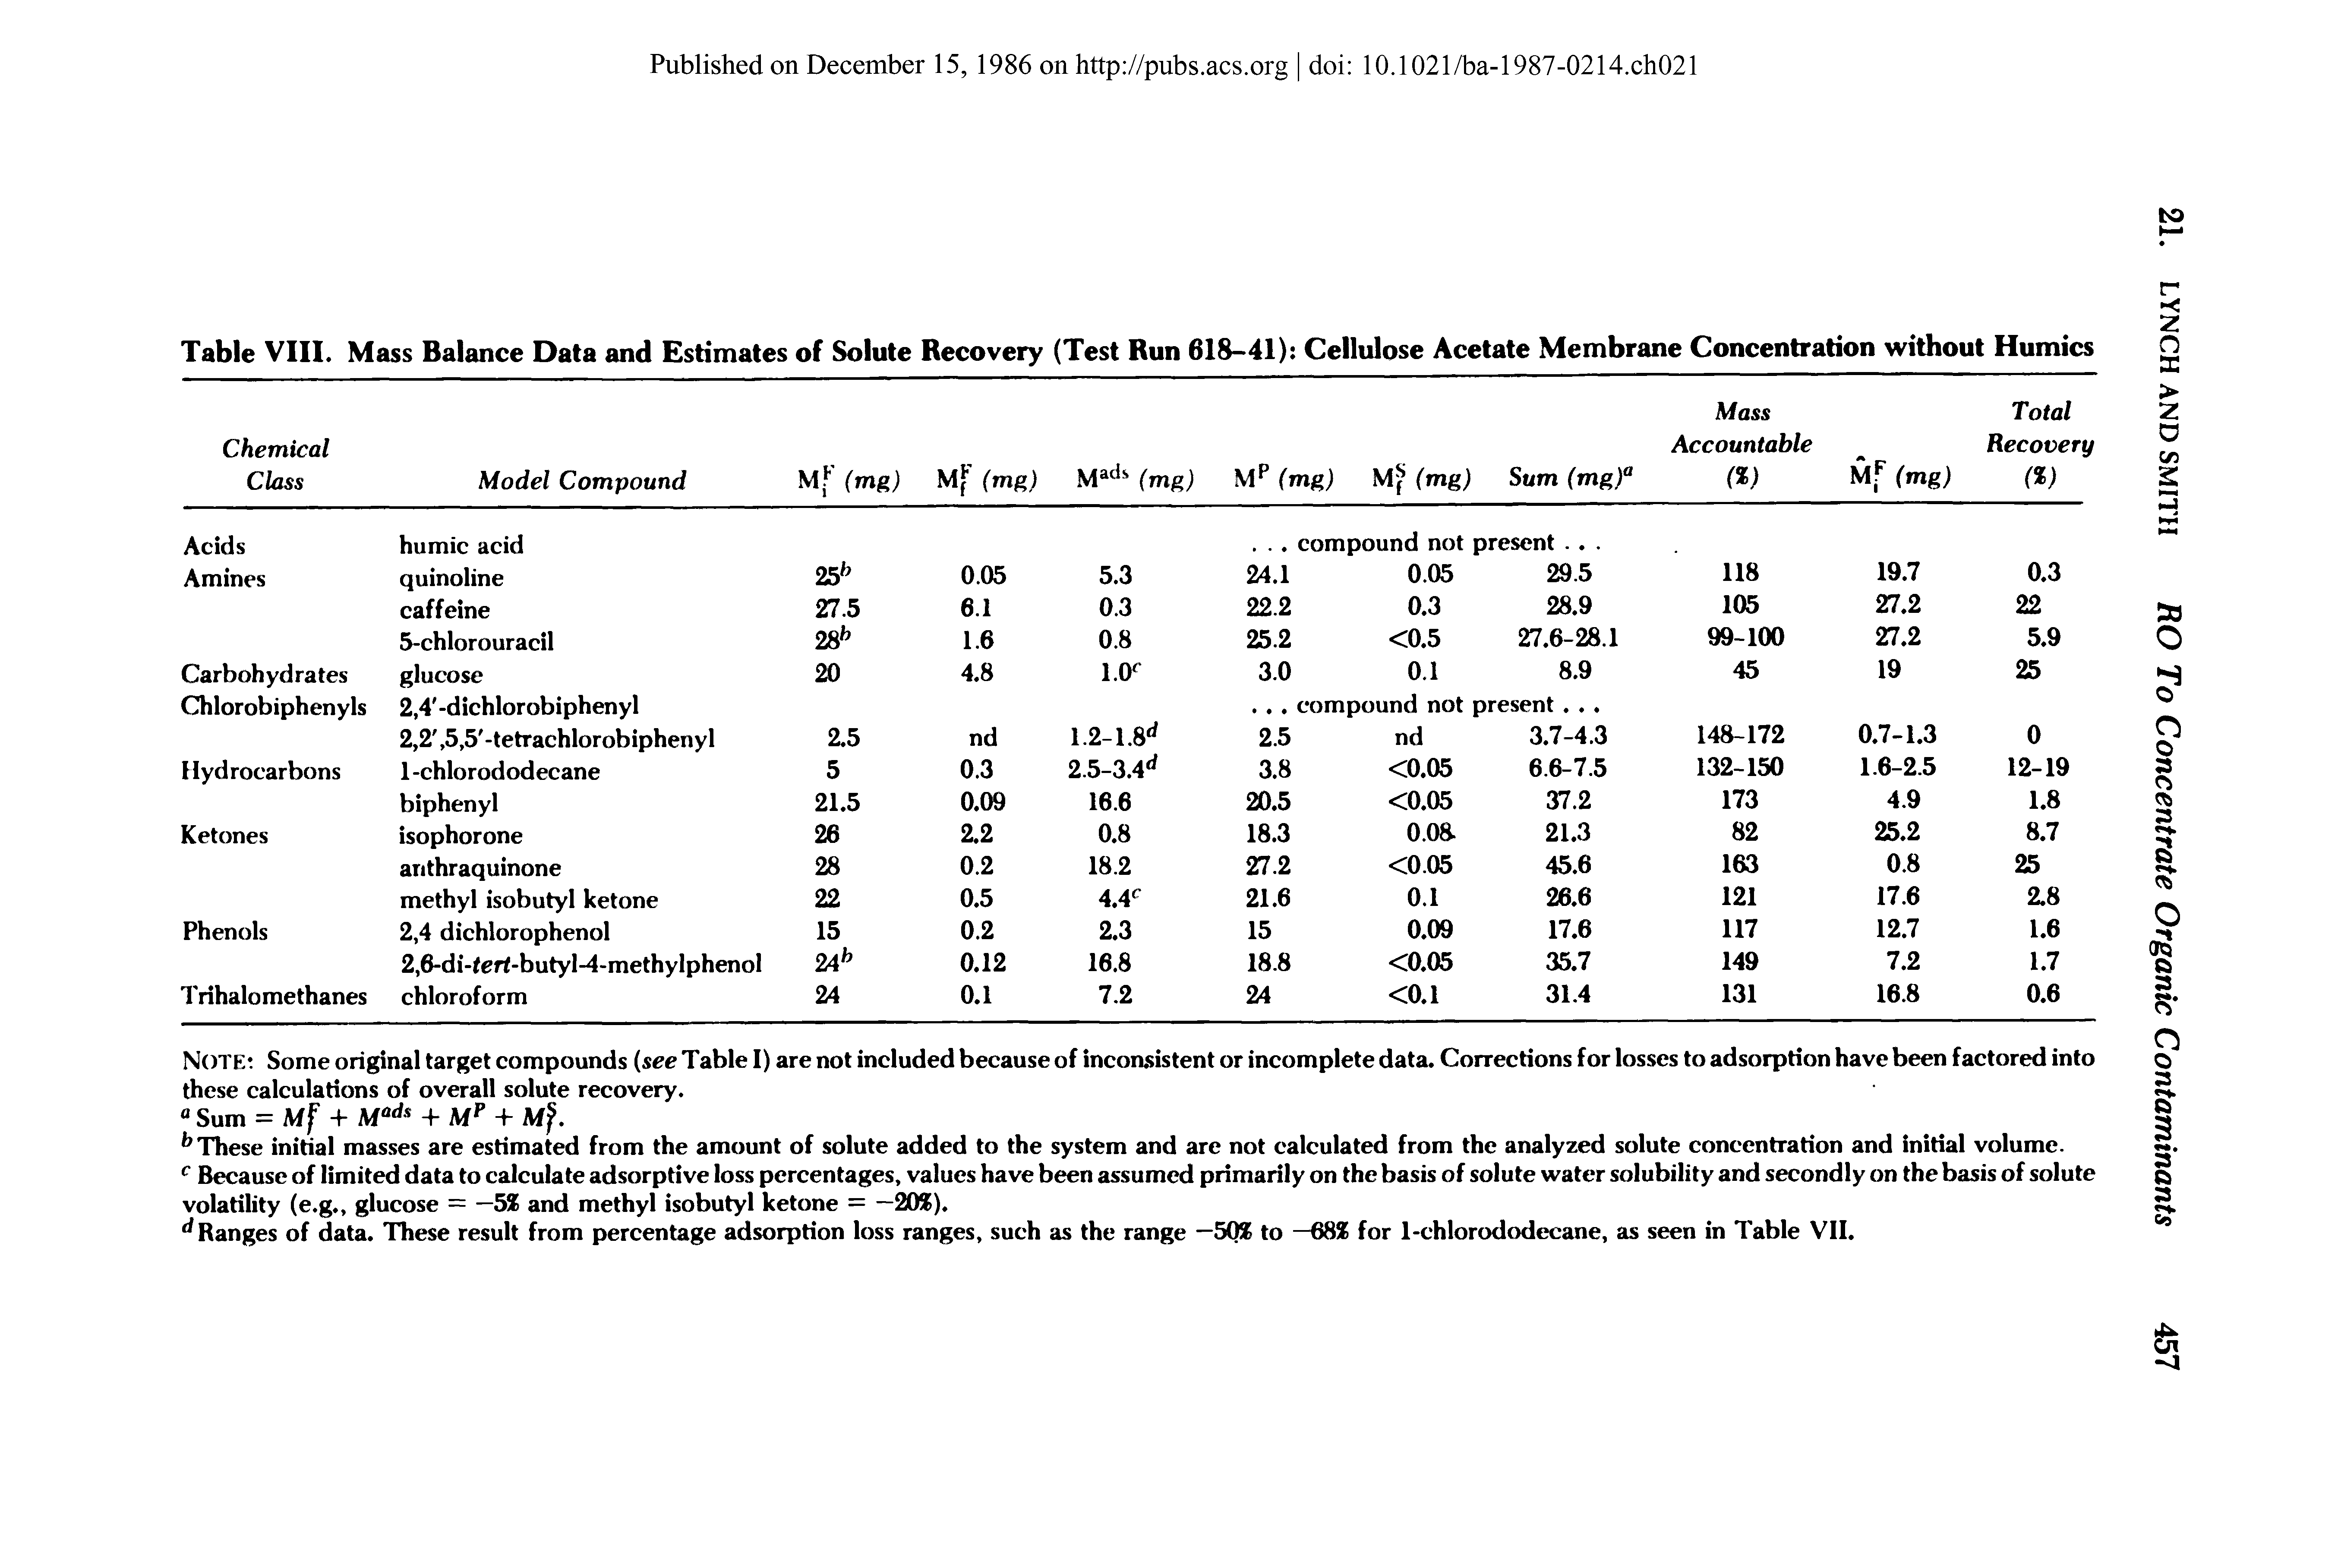 Table VIII. Mass Balance Data and Estimates of Solute Recovery (Test Run 618-41) Cellulose Acetate Membrane Concentration without Humics...